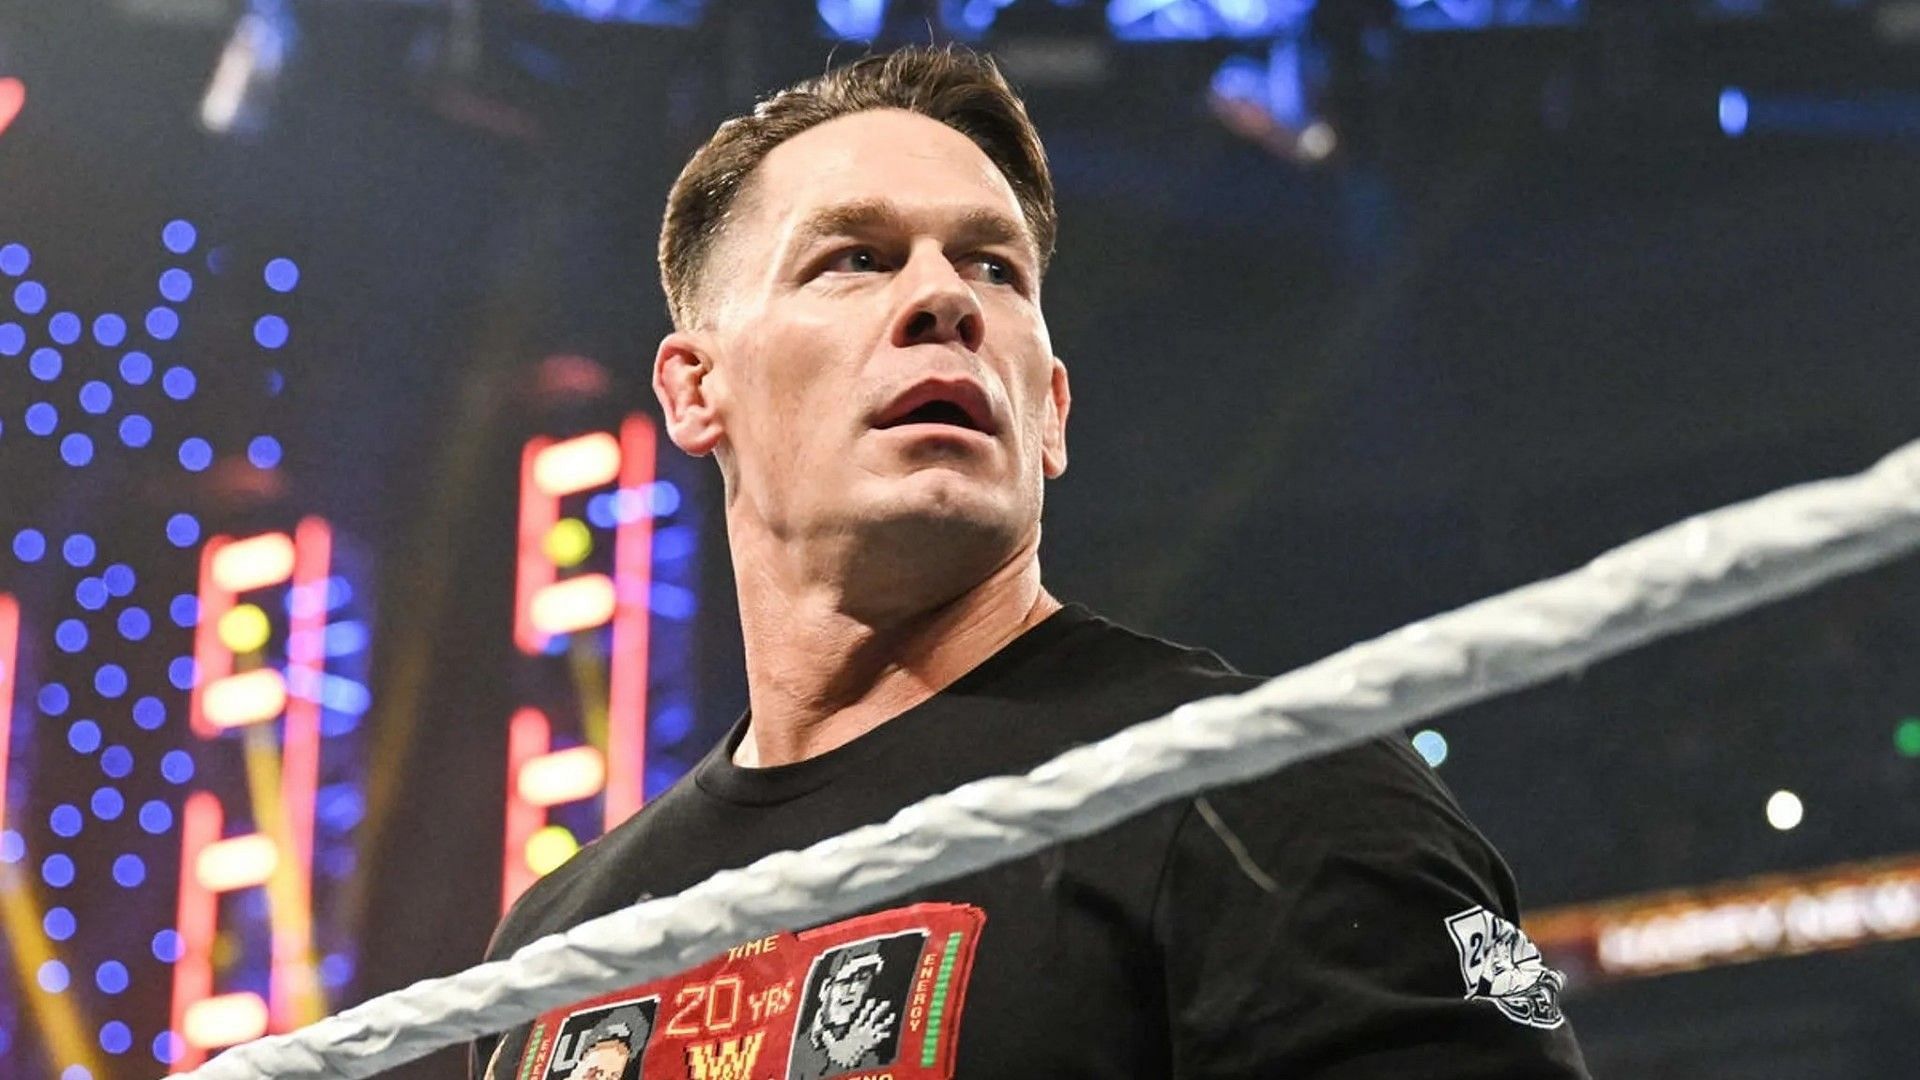 John Cena stands tall inside the WWE ring